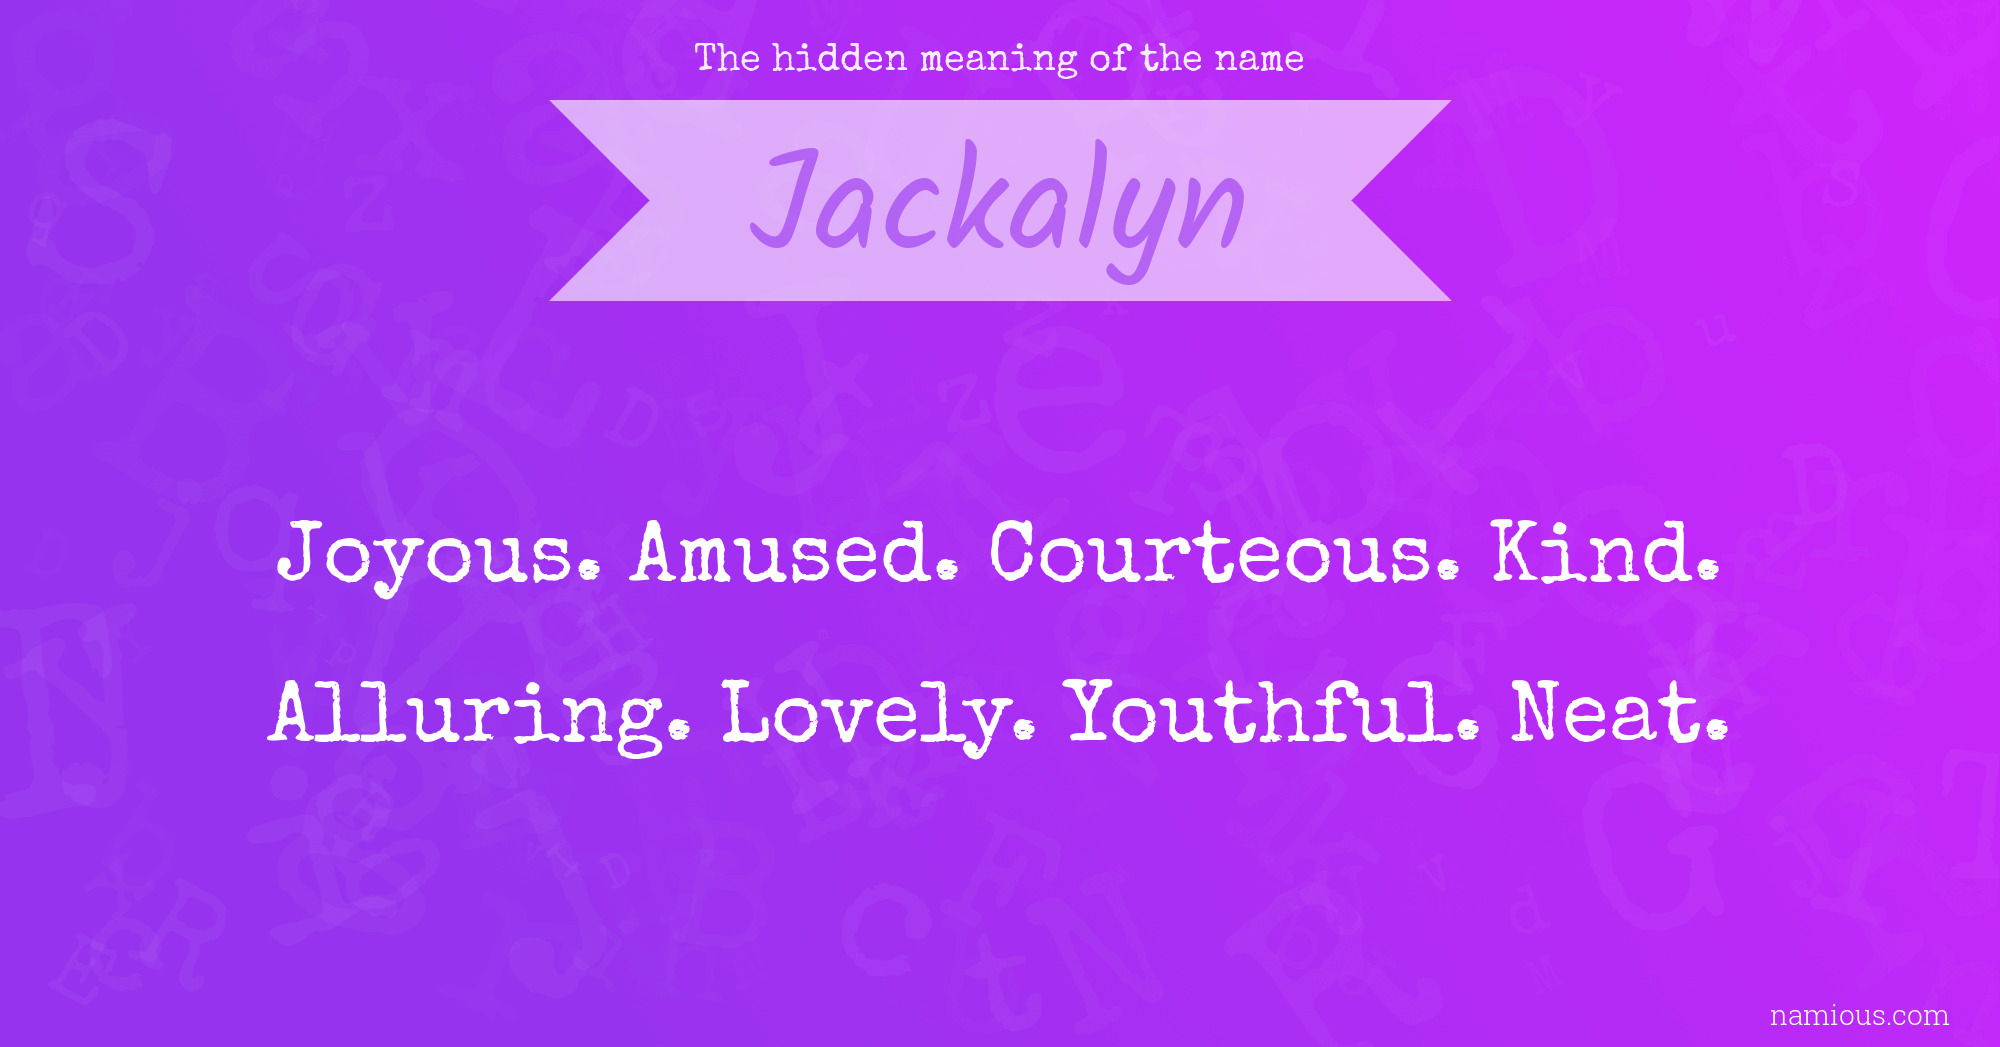 The hidden meaning of the name Jackalyn